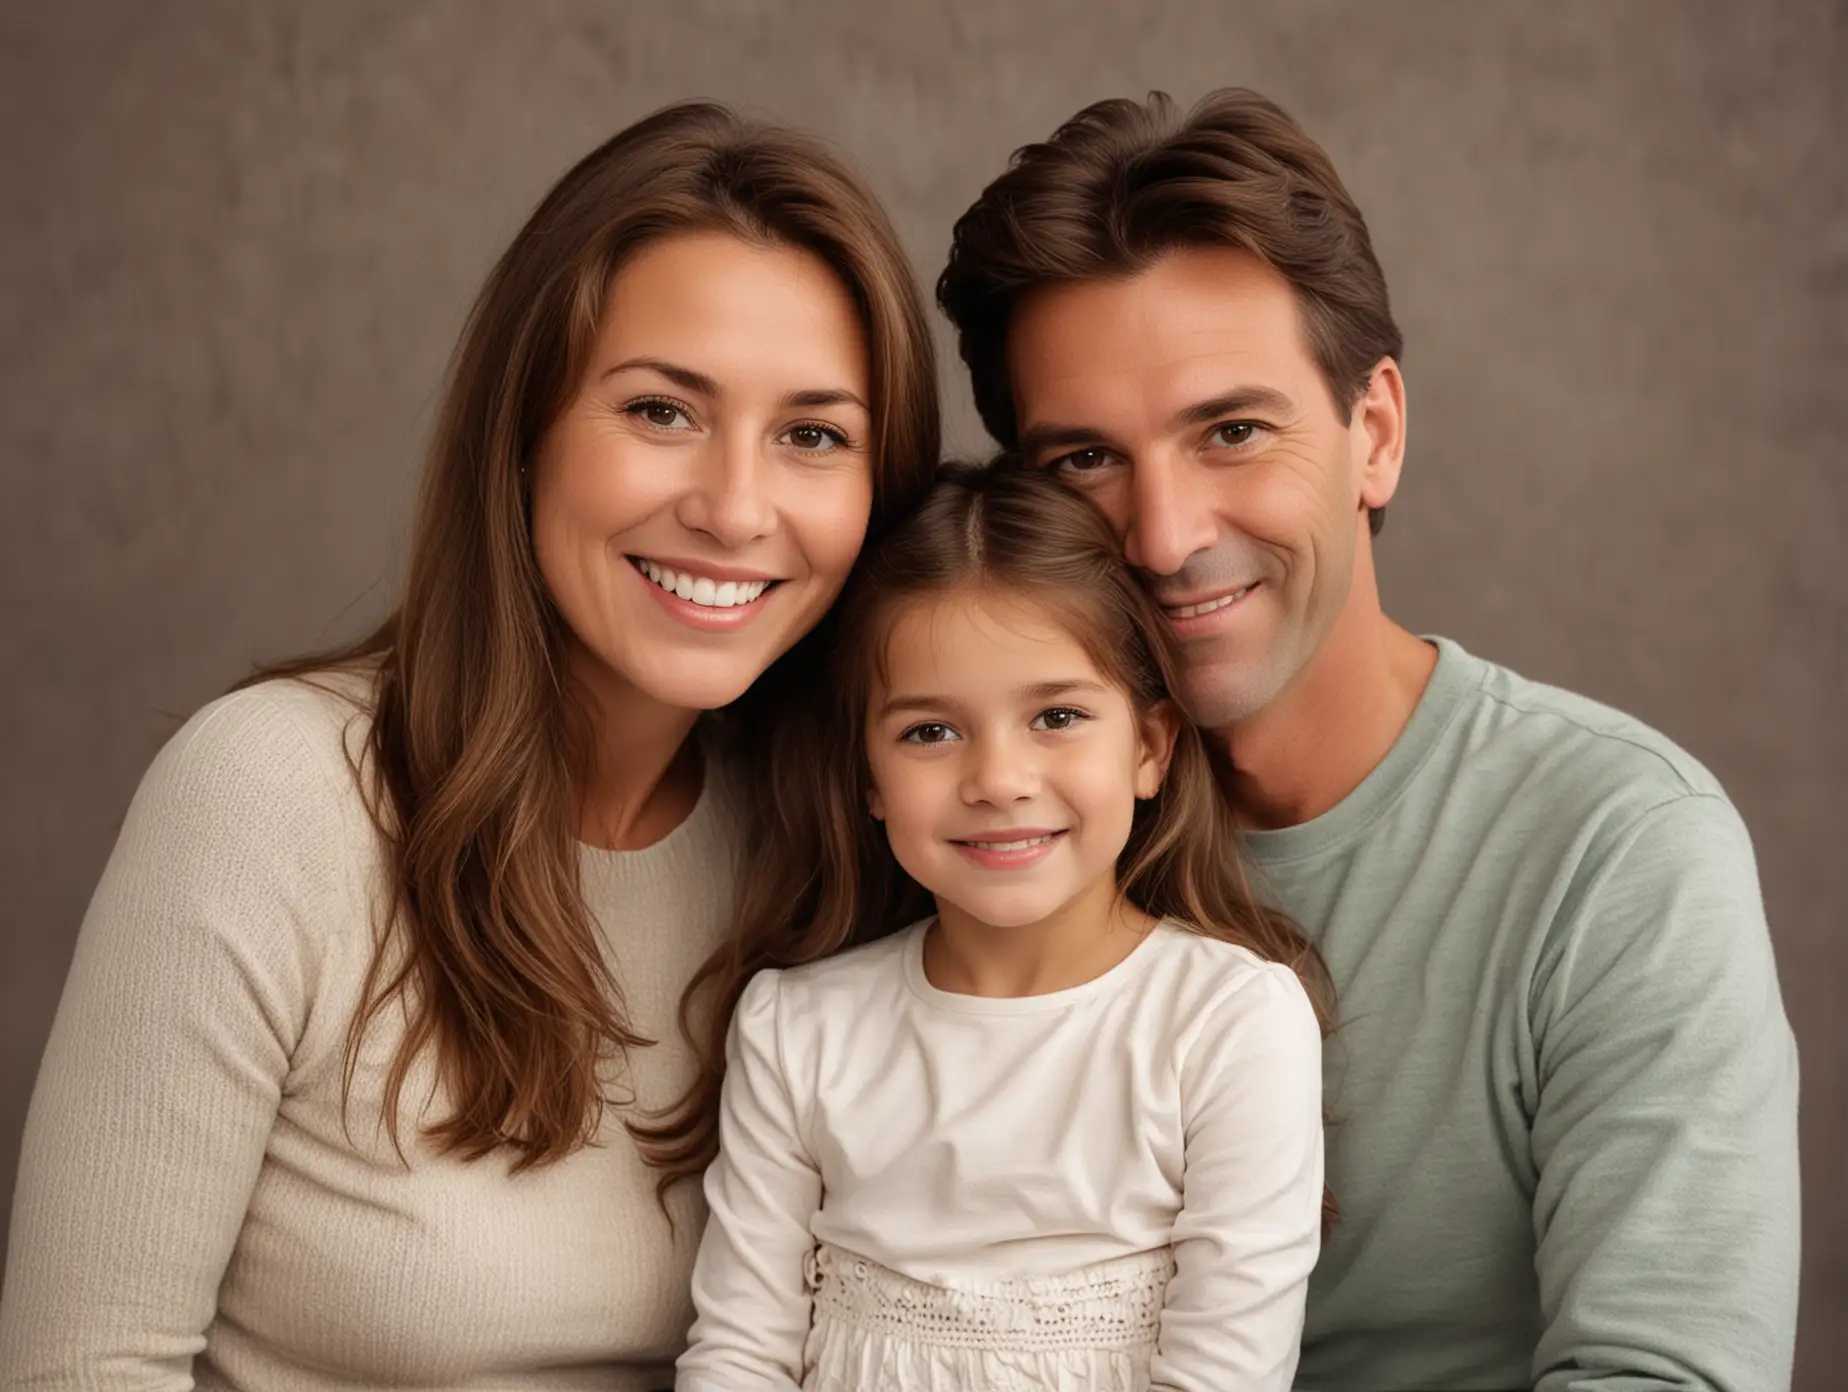 family photo with brown hair, one daughter and her parents